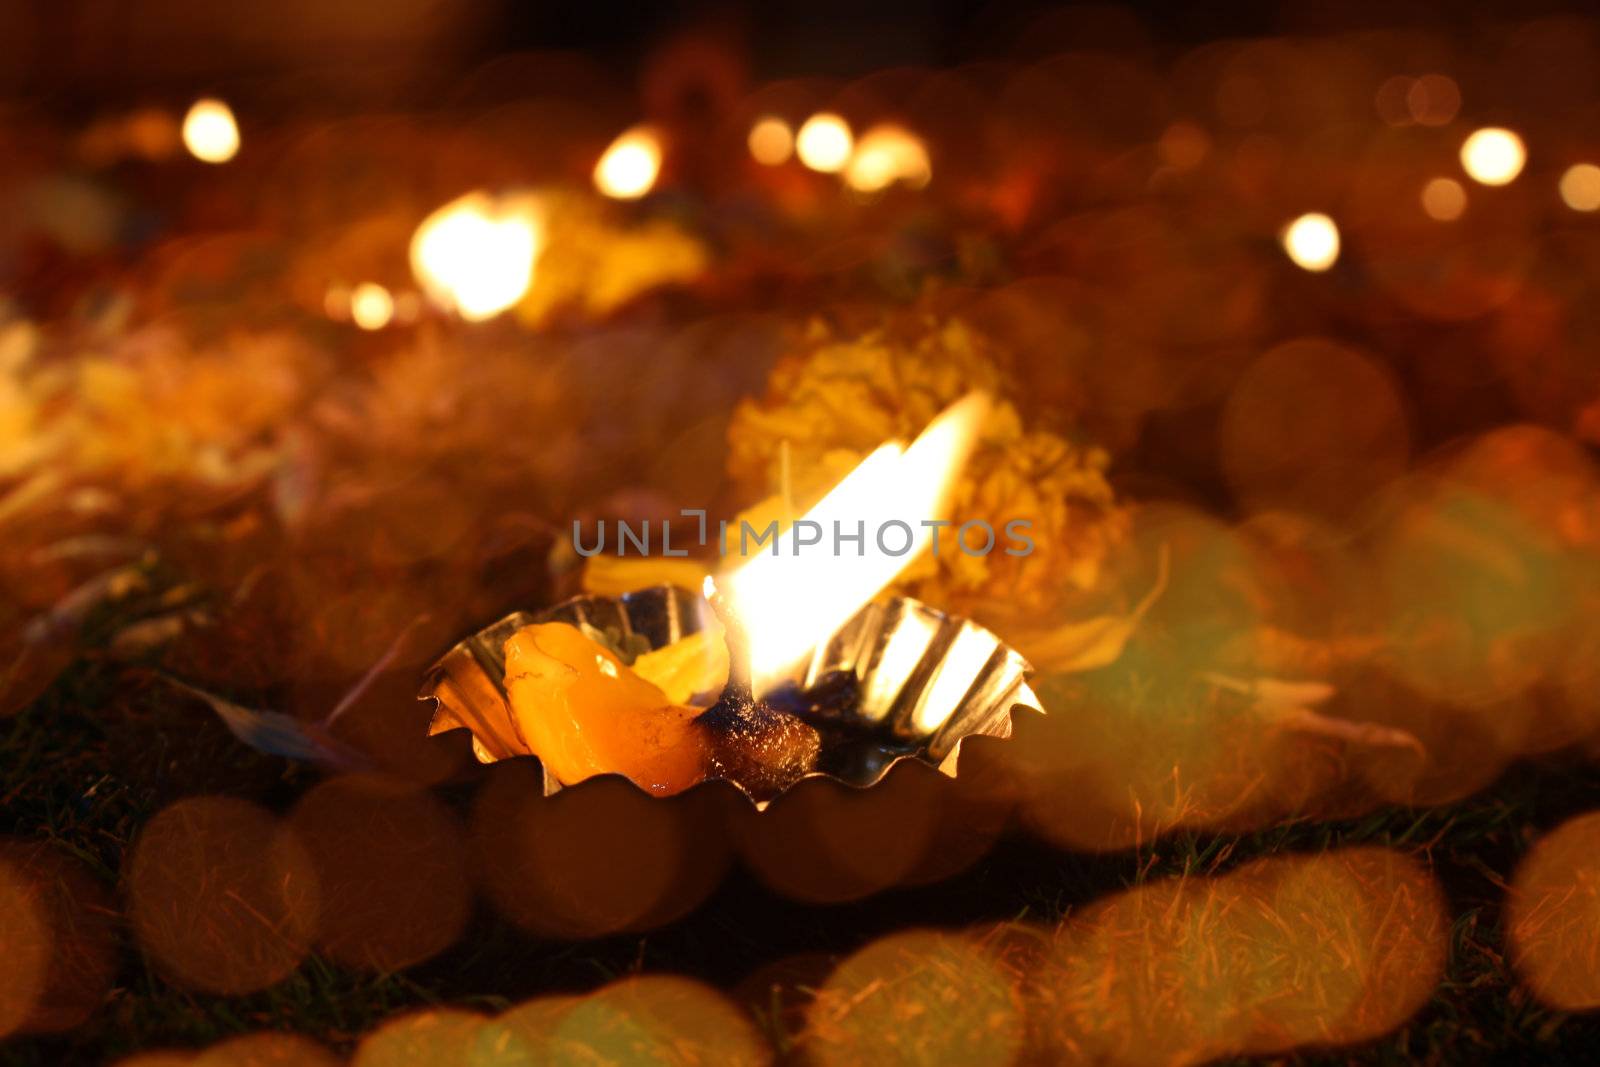 A traditional lamp lit around different lights on the festtive occassion of Diwali festival in India.